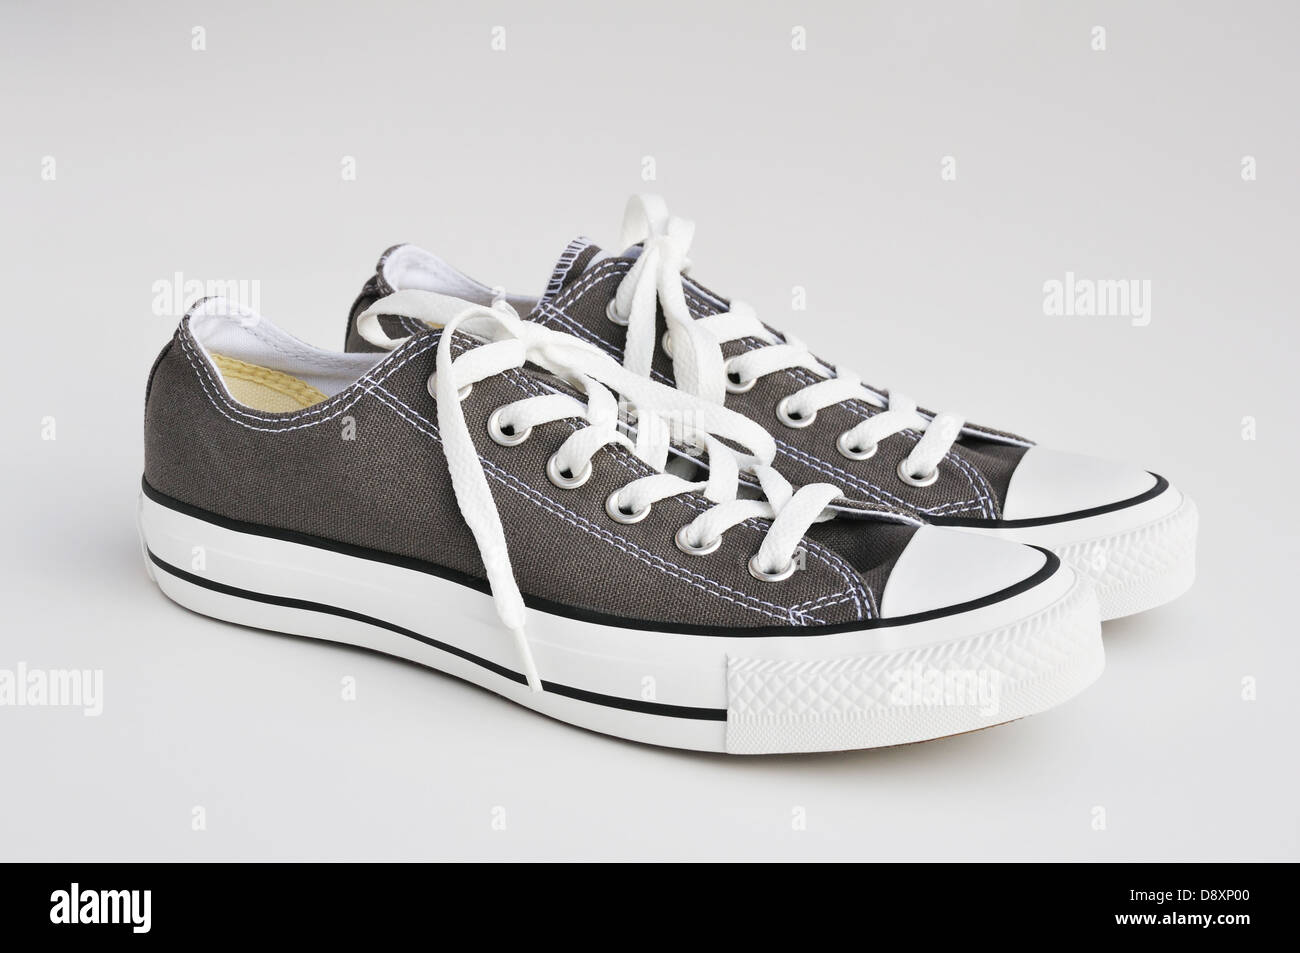 Converse All Star shoes Stock Photo - Alamy